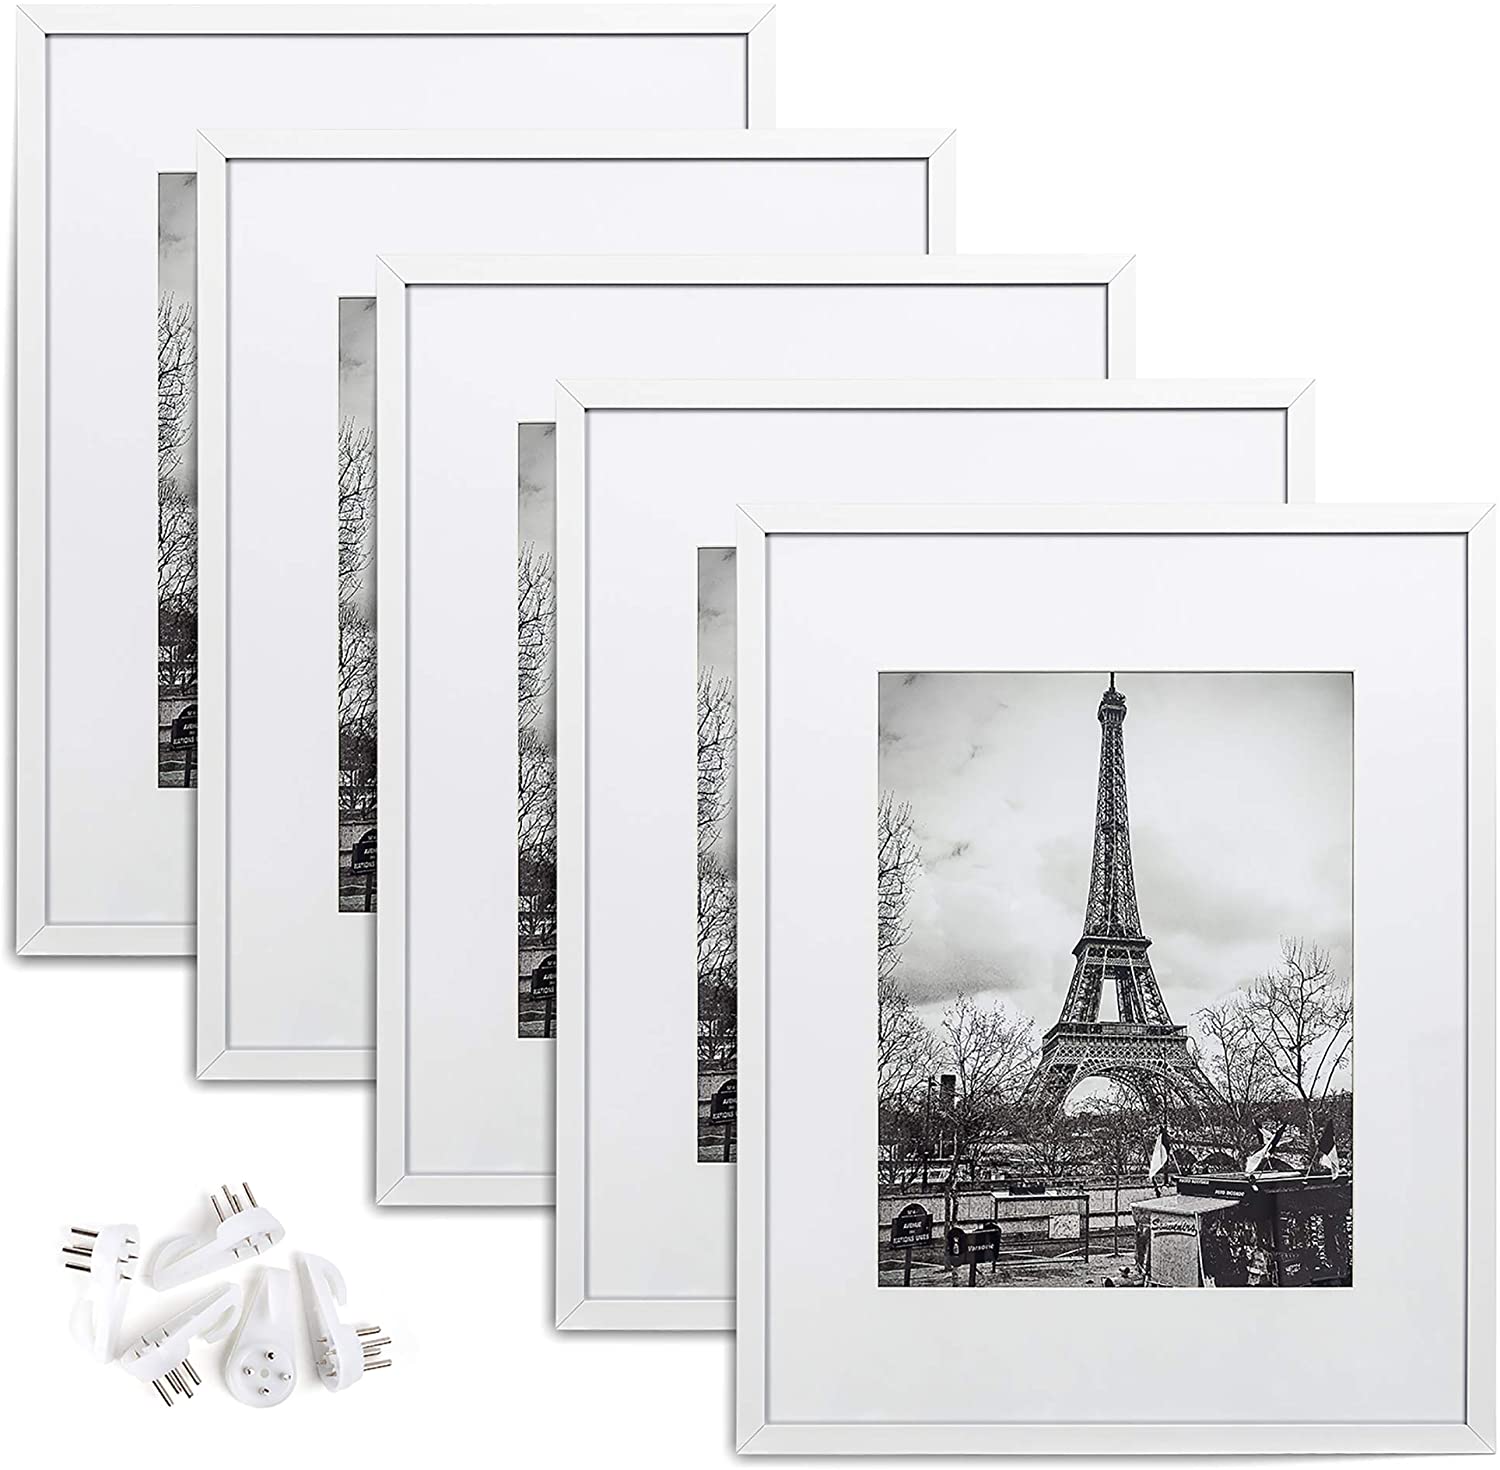 16X20 Picture Frame in Black - Set of 5 - Use as 11X14 Picture Frame with  Mat or